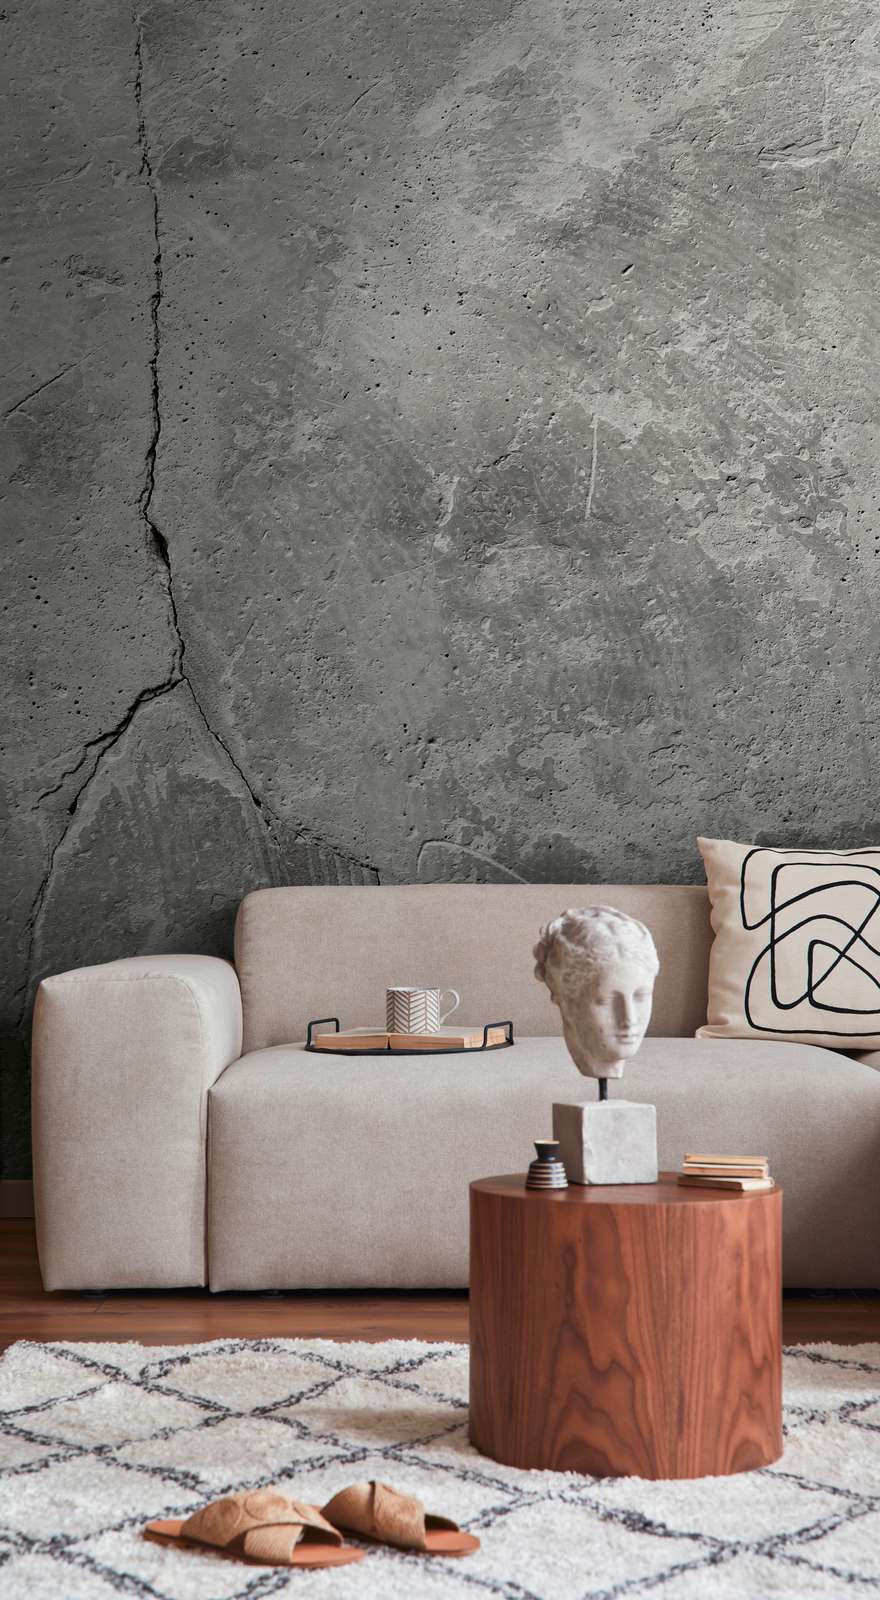             Photo wallpaper with 3D concrete wall with crack - Grey
        